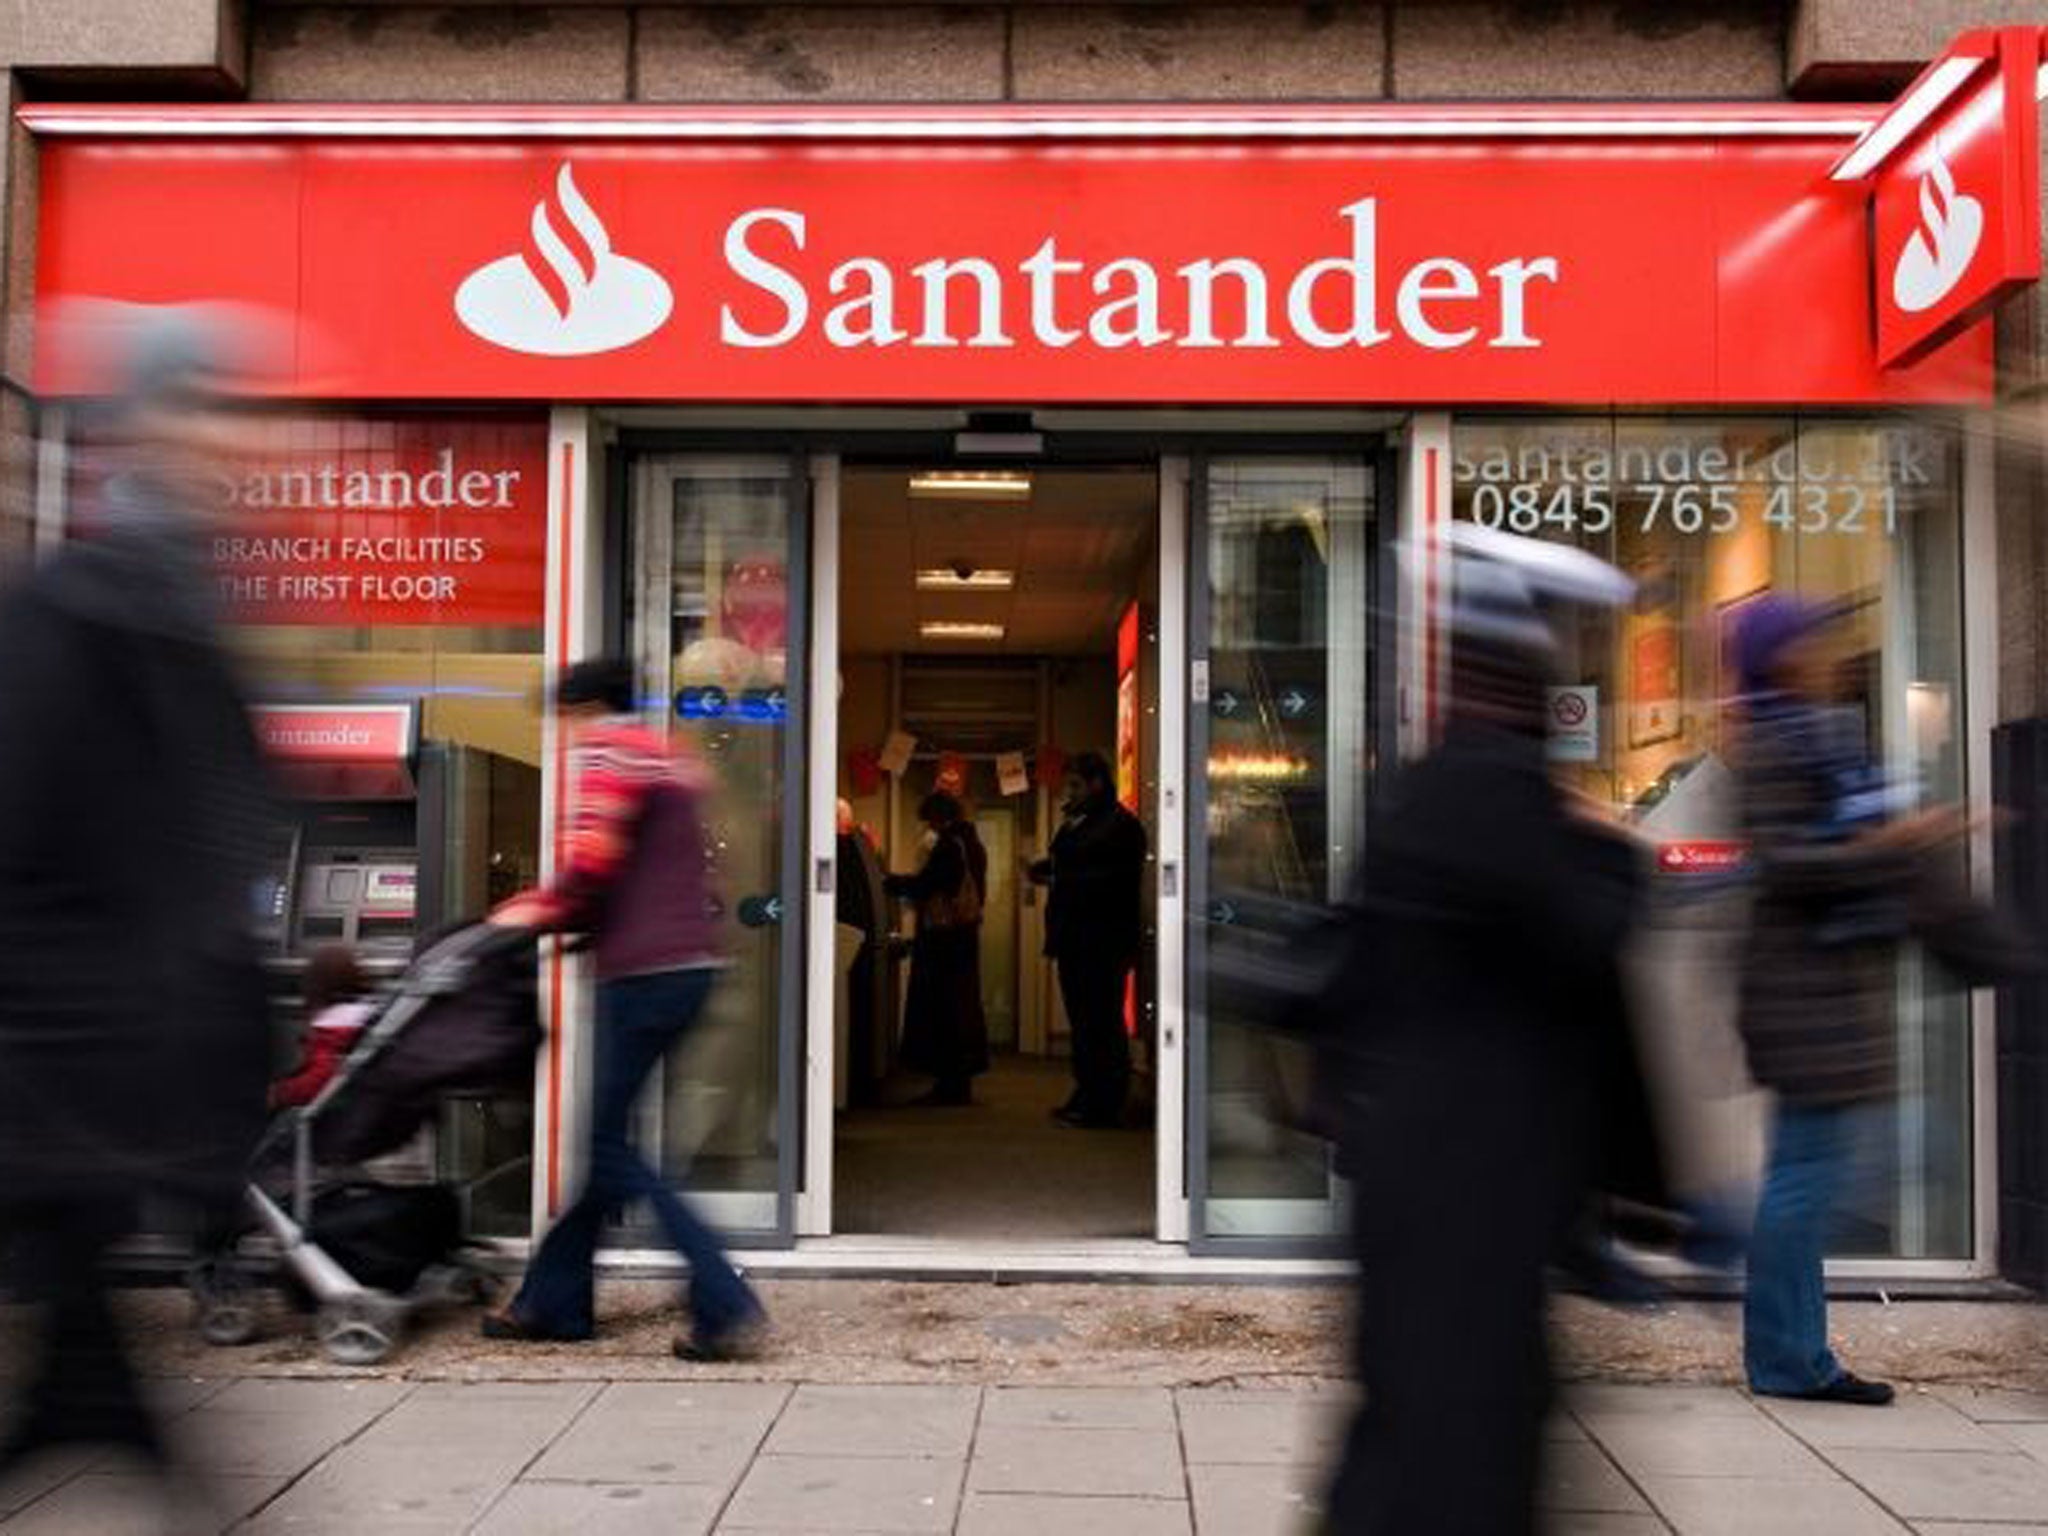 Santander charges a transaction fee of £10 per cheque, no matter how many cheques are being changed